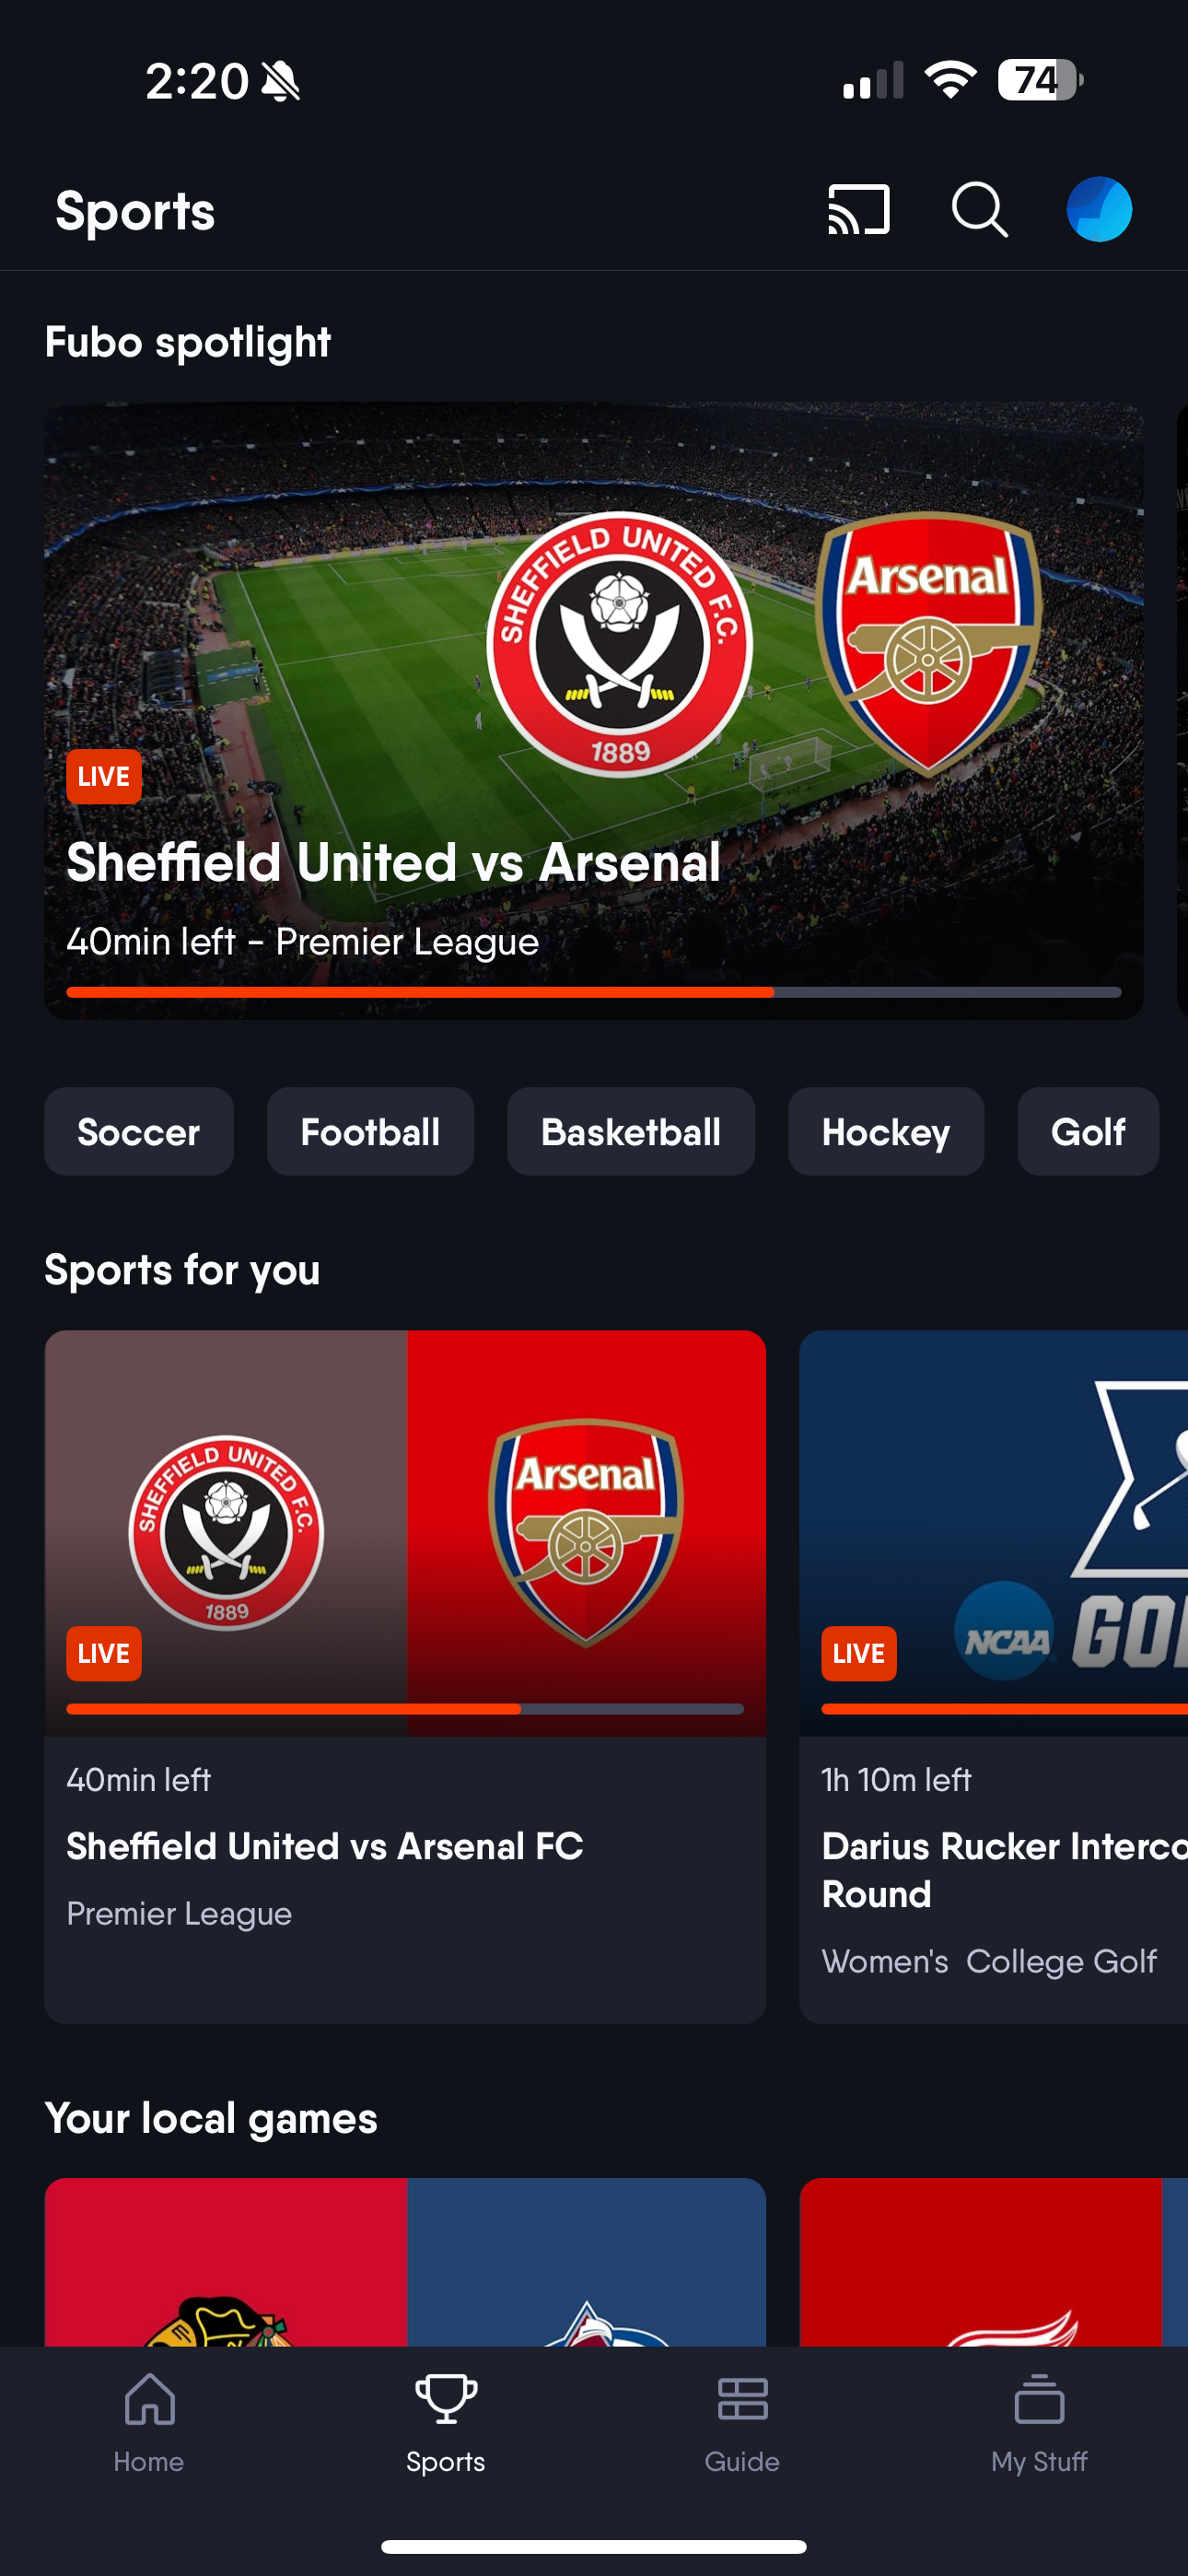 SPORTS screen of the FuboTV app on iOS with different events shown.PNG